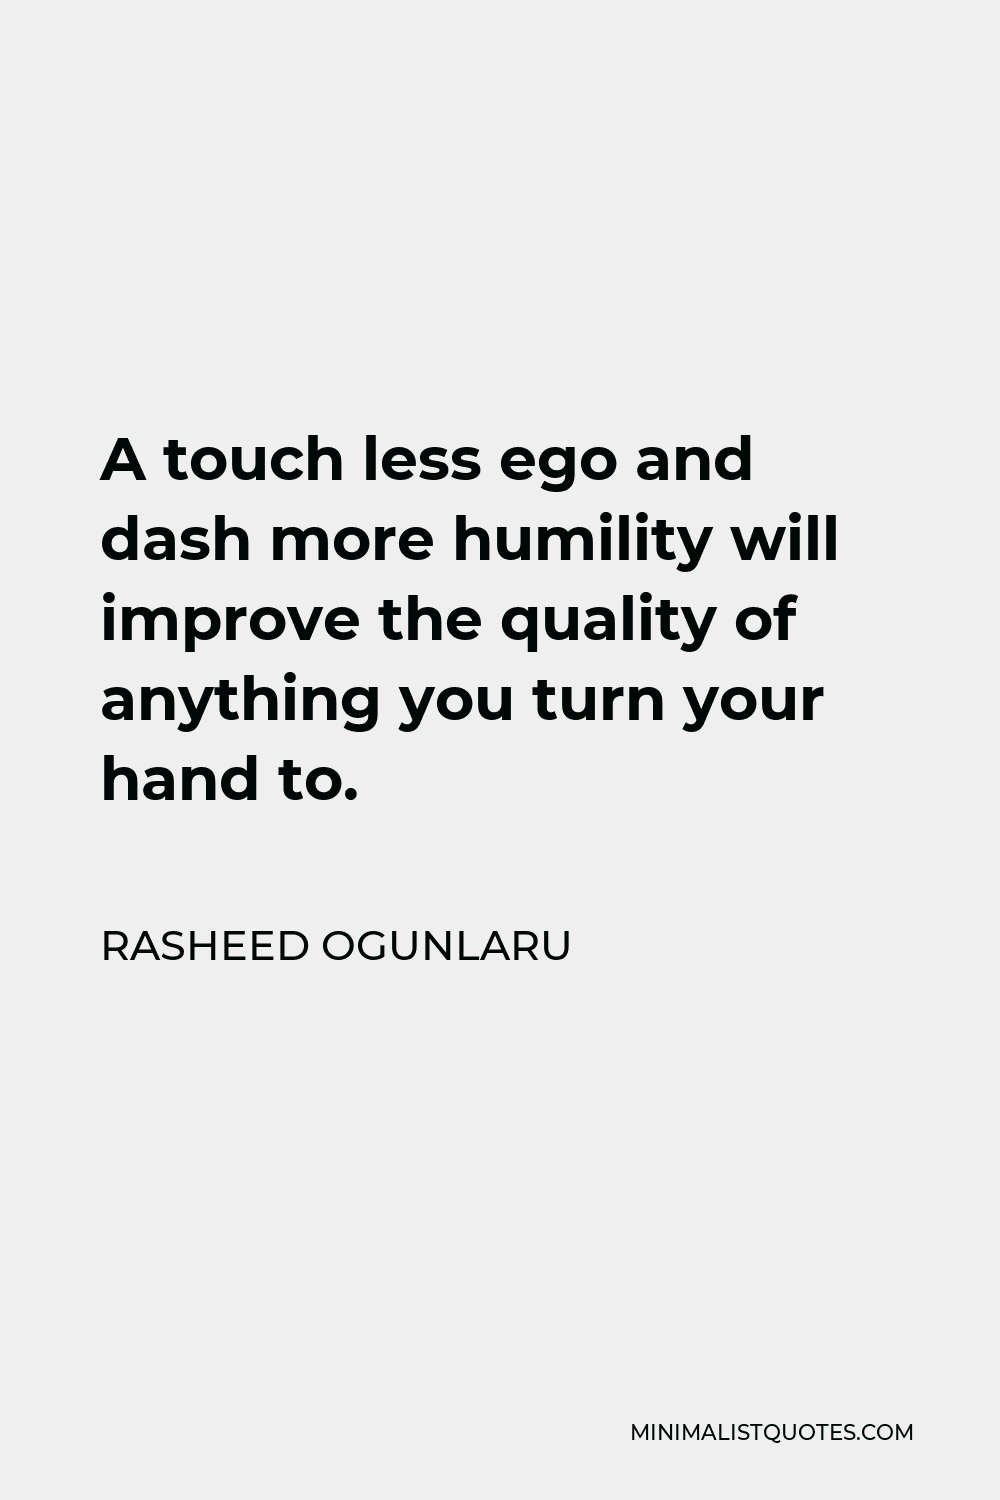 Rasheed Ogunlaru Quote - A touch less ego and dash more humility will improve the quality of anything you turn your hand to.